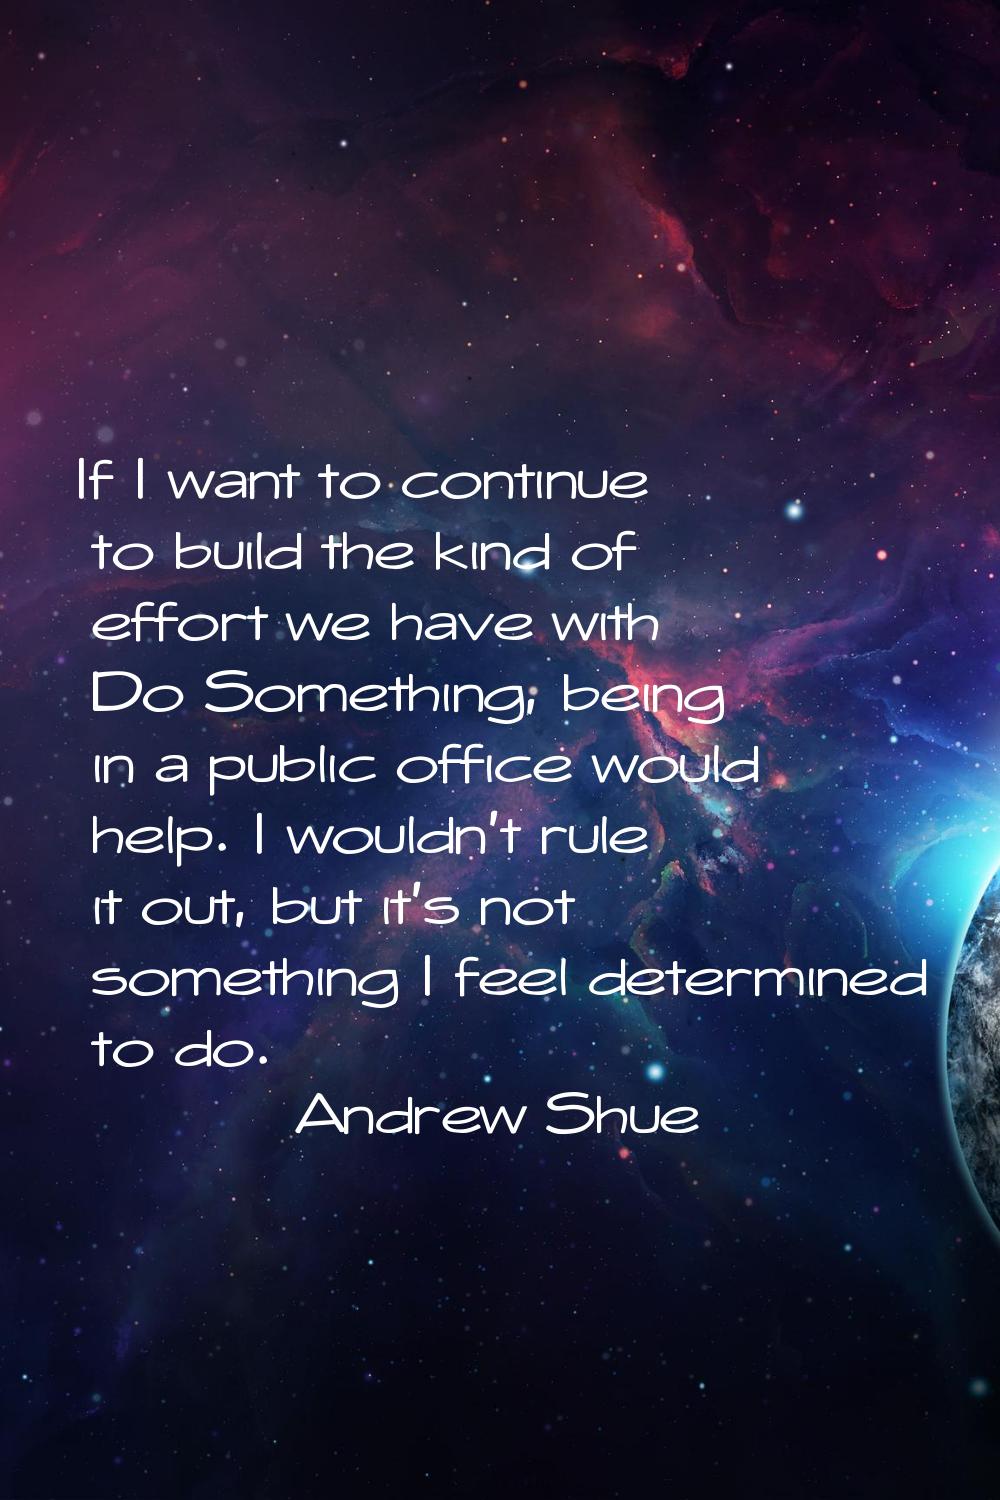 If I want to continue to build the kind of effort we have with Do Something, being in a public offi